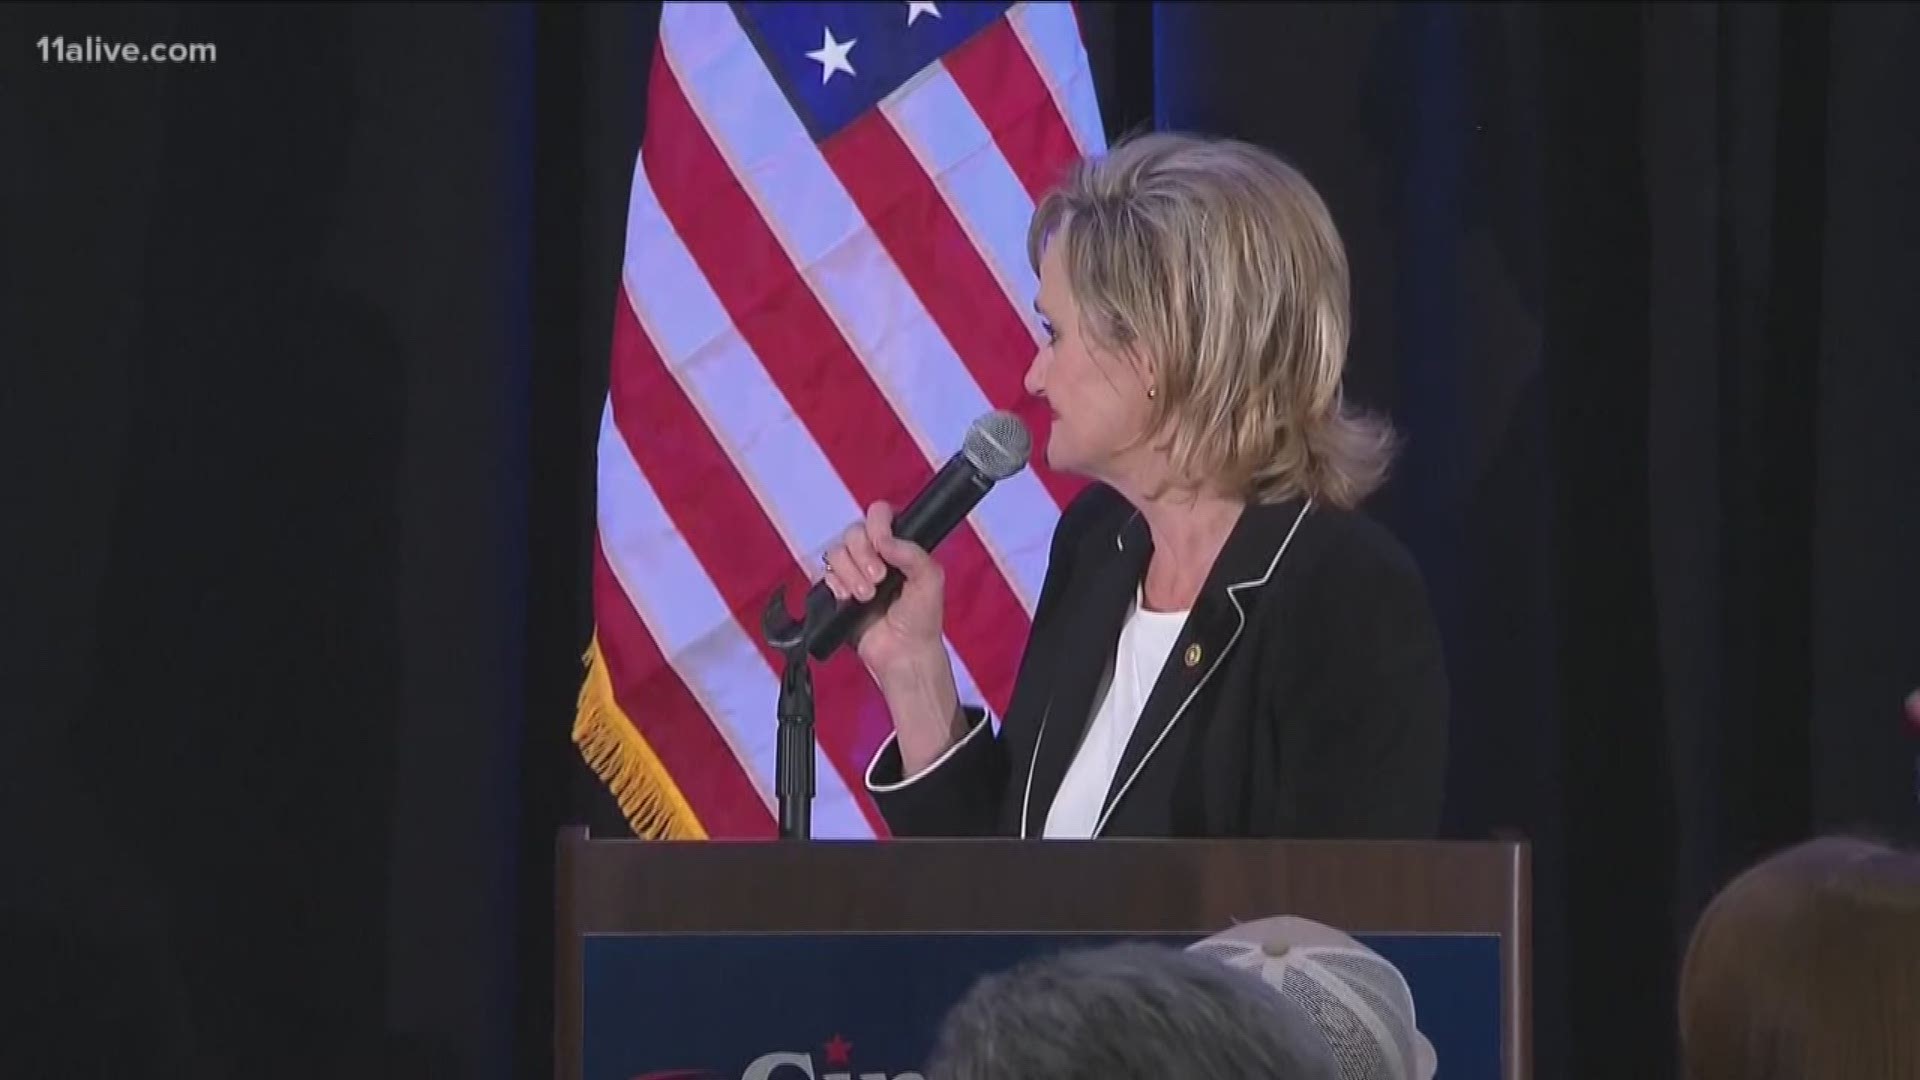 Republican Cindy Hyde-Smith overcame several controversies in Mississippi's racially-charged Senate race to become the state's first woman elected to Congress.  Late Tuesday, Hyde-Smith was declared the winner over Democrat Mike Espy.